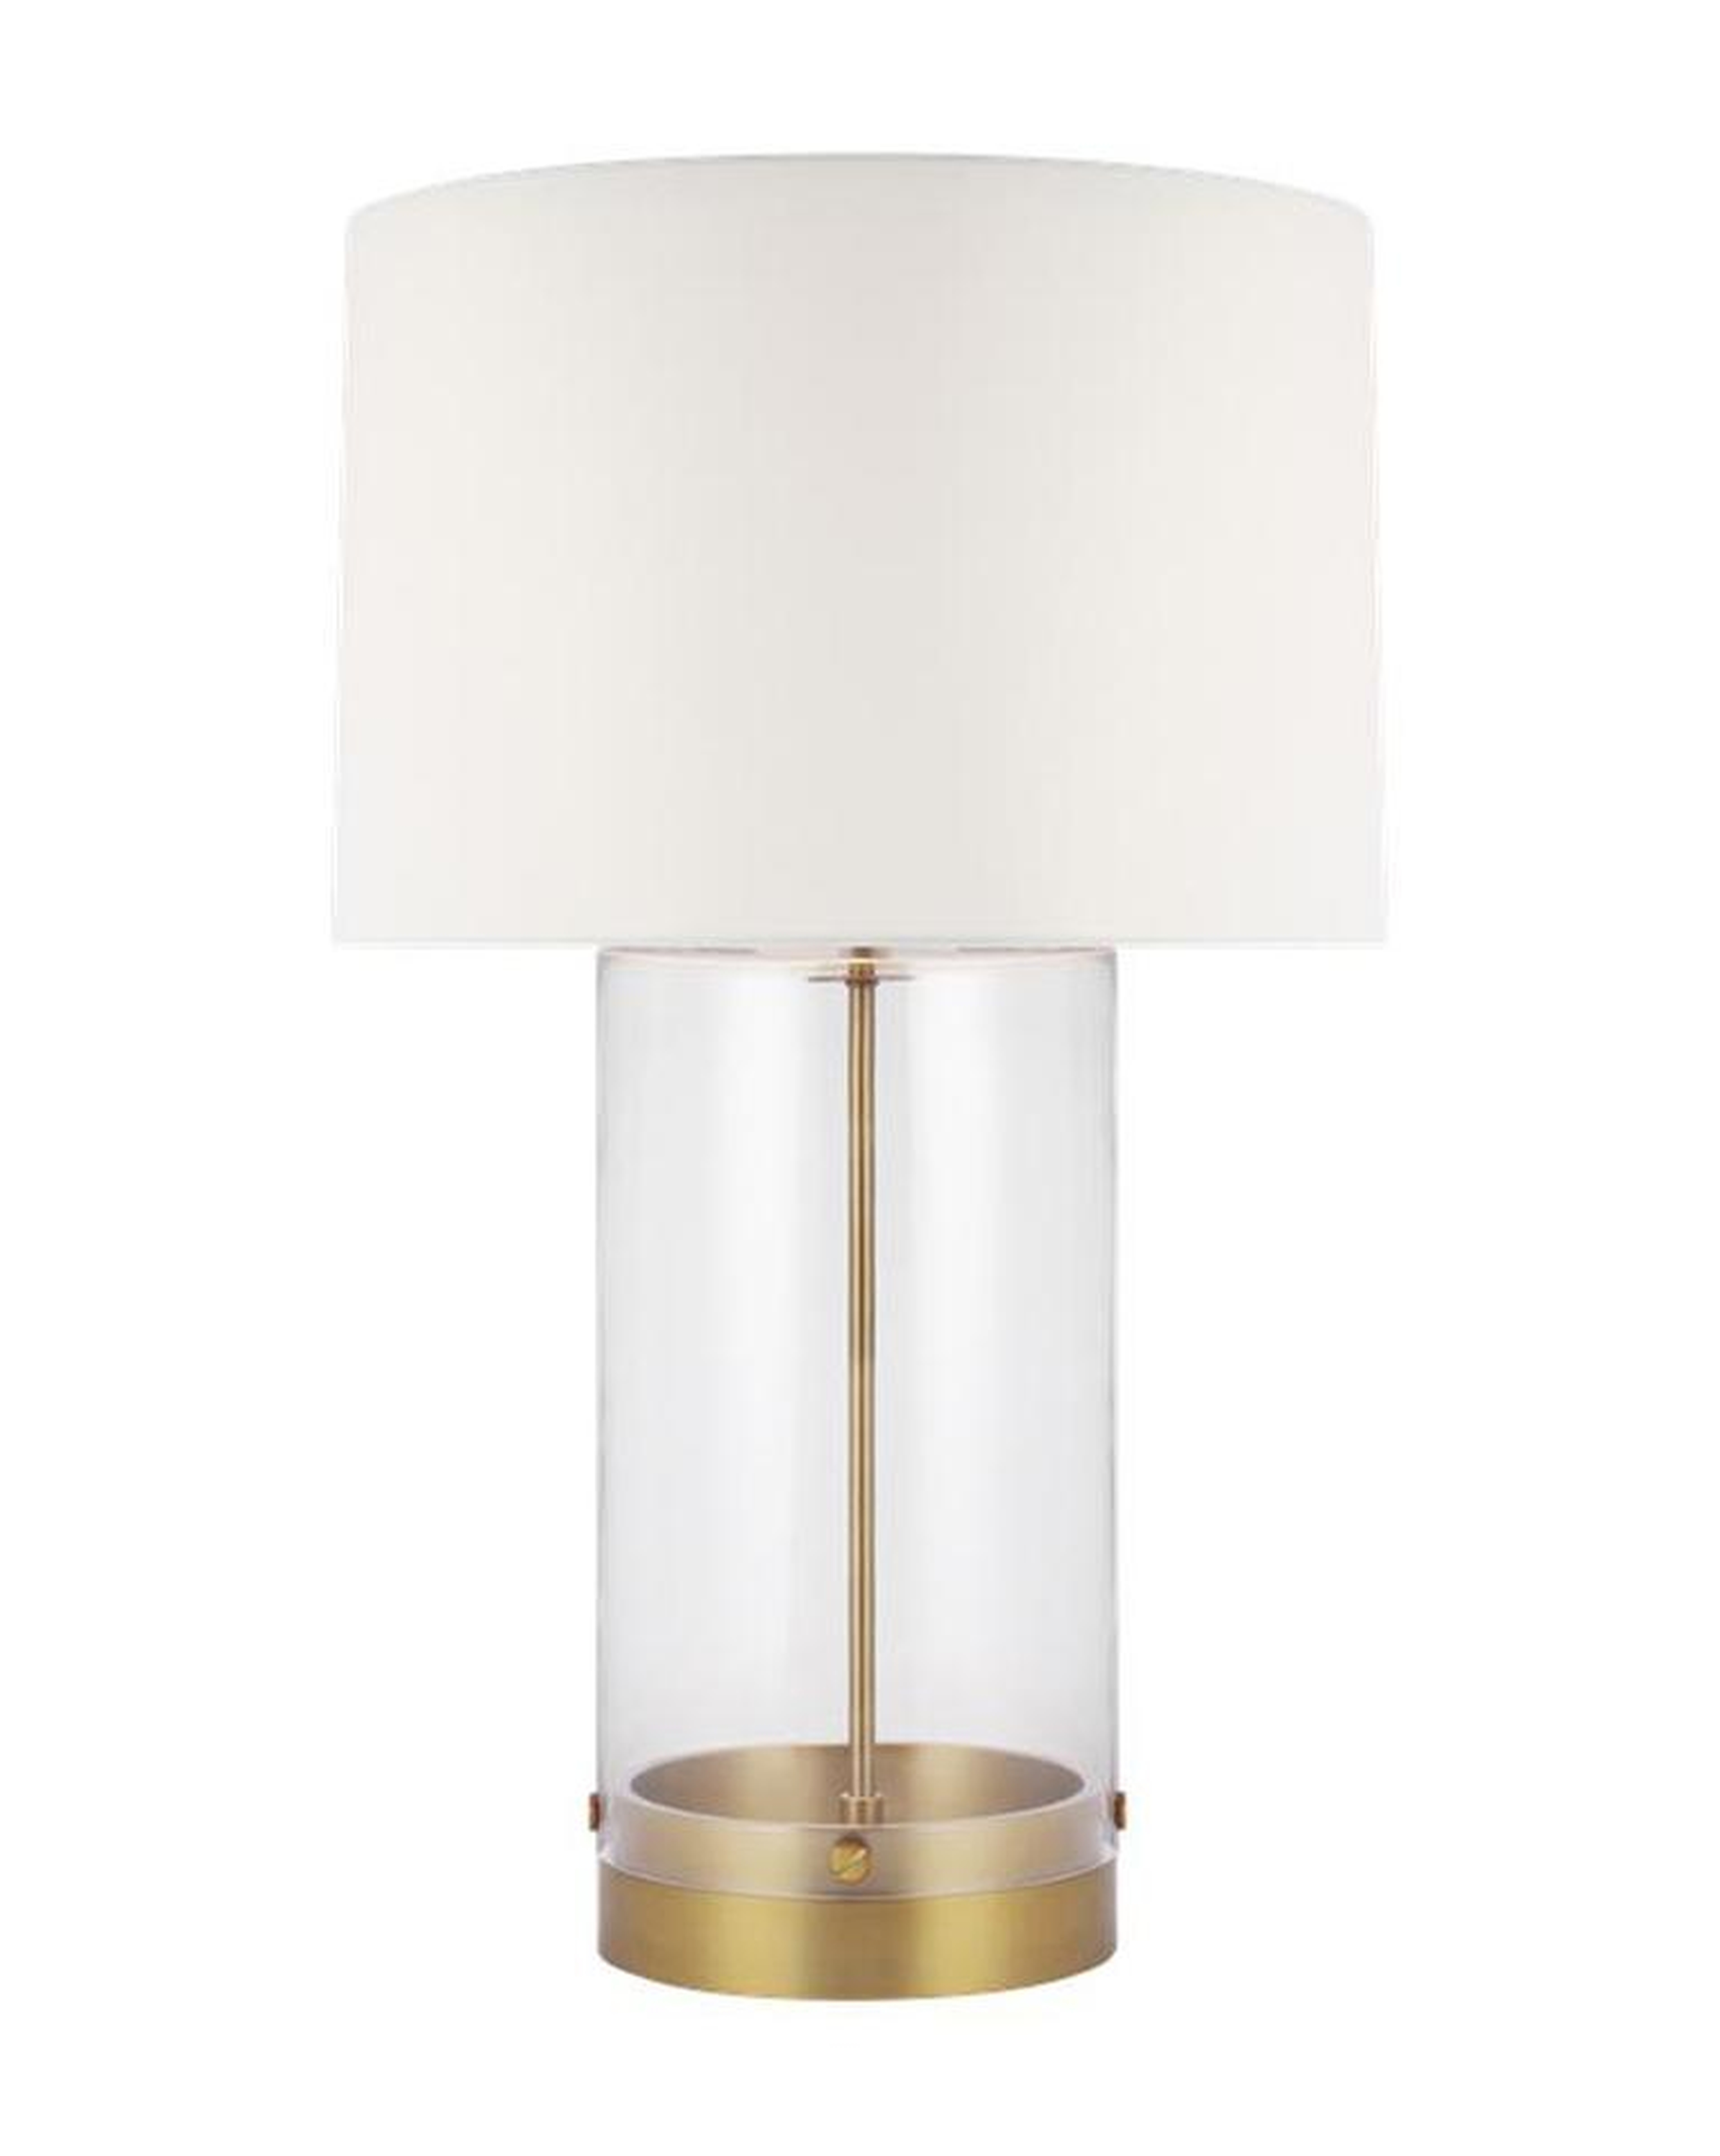 Allen Table Lamp / 31.25"H - McGee & Co.